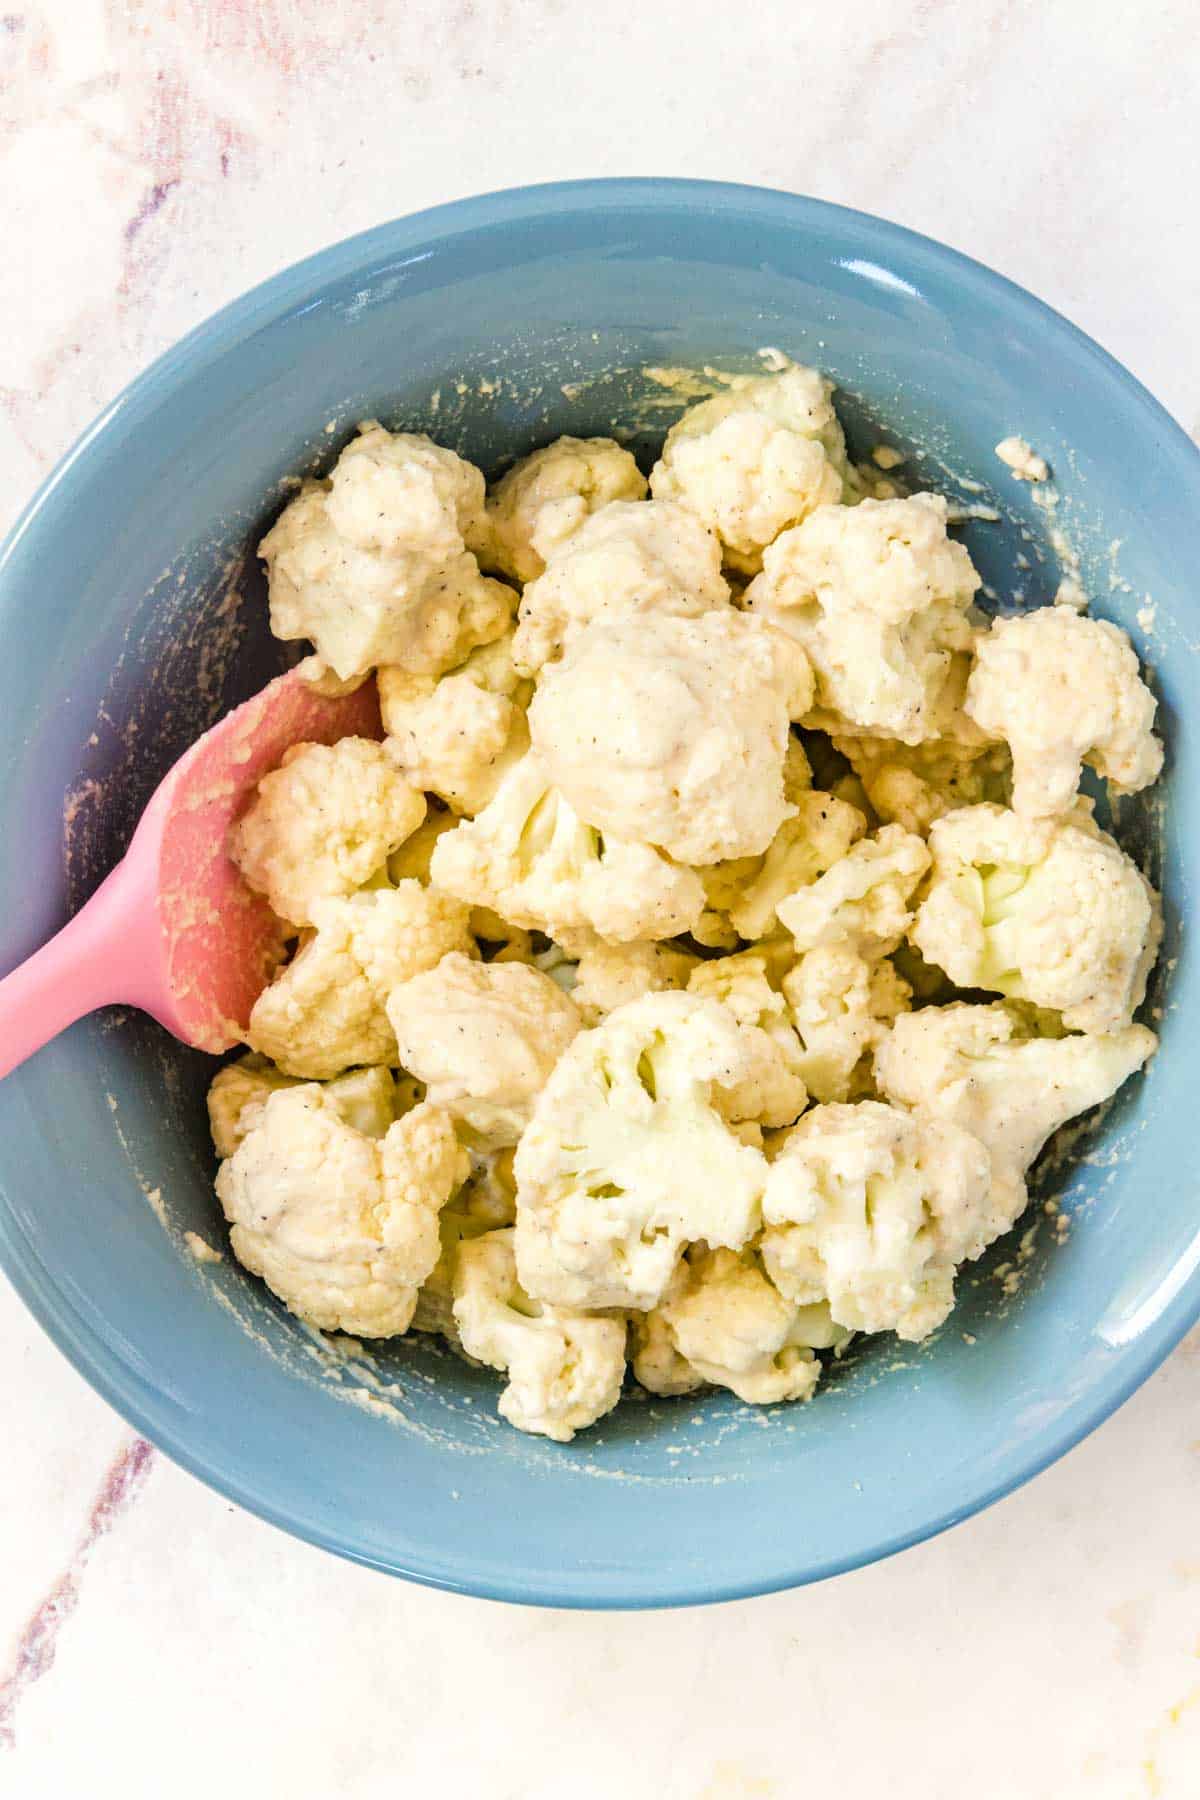 Cauliflower florets being coated in batter in a blue bowl.